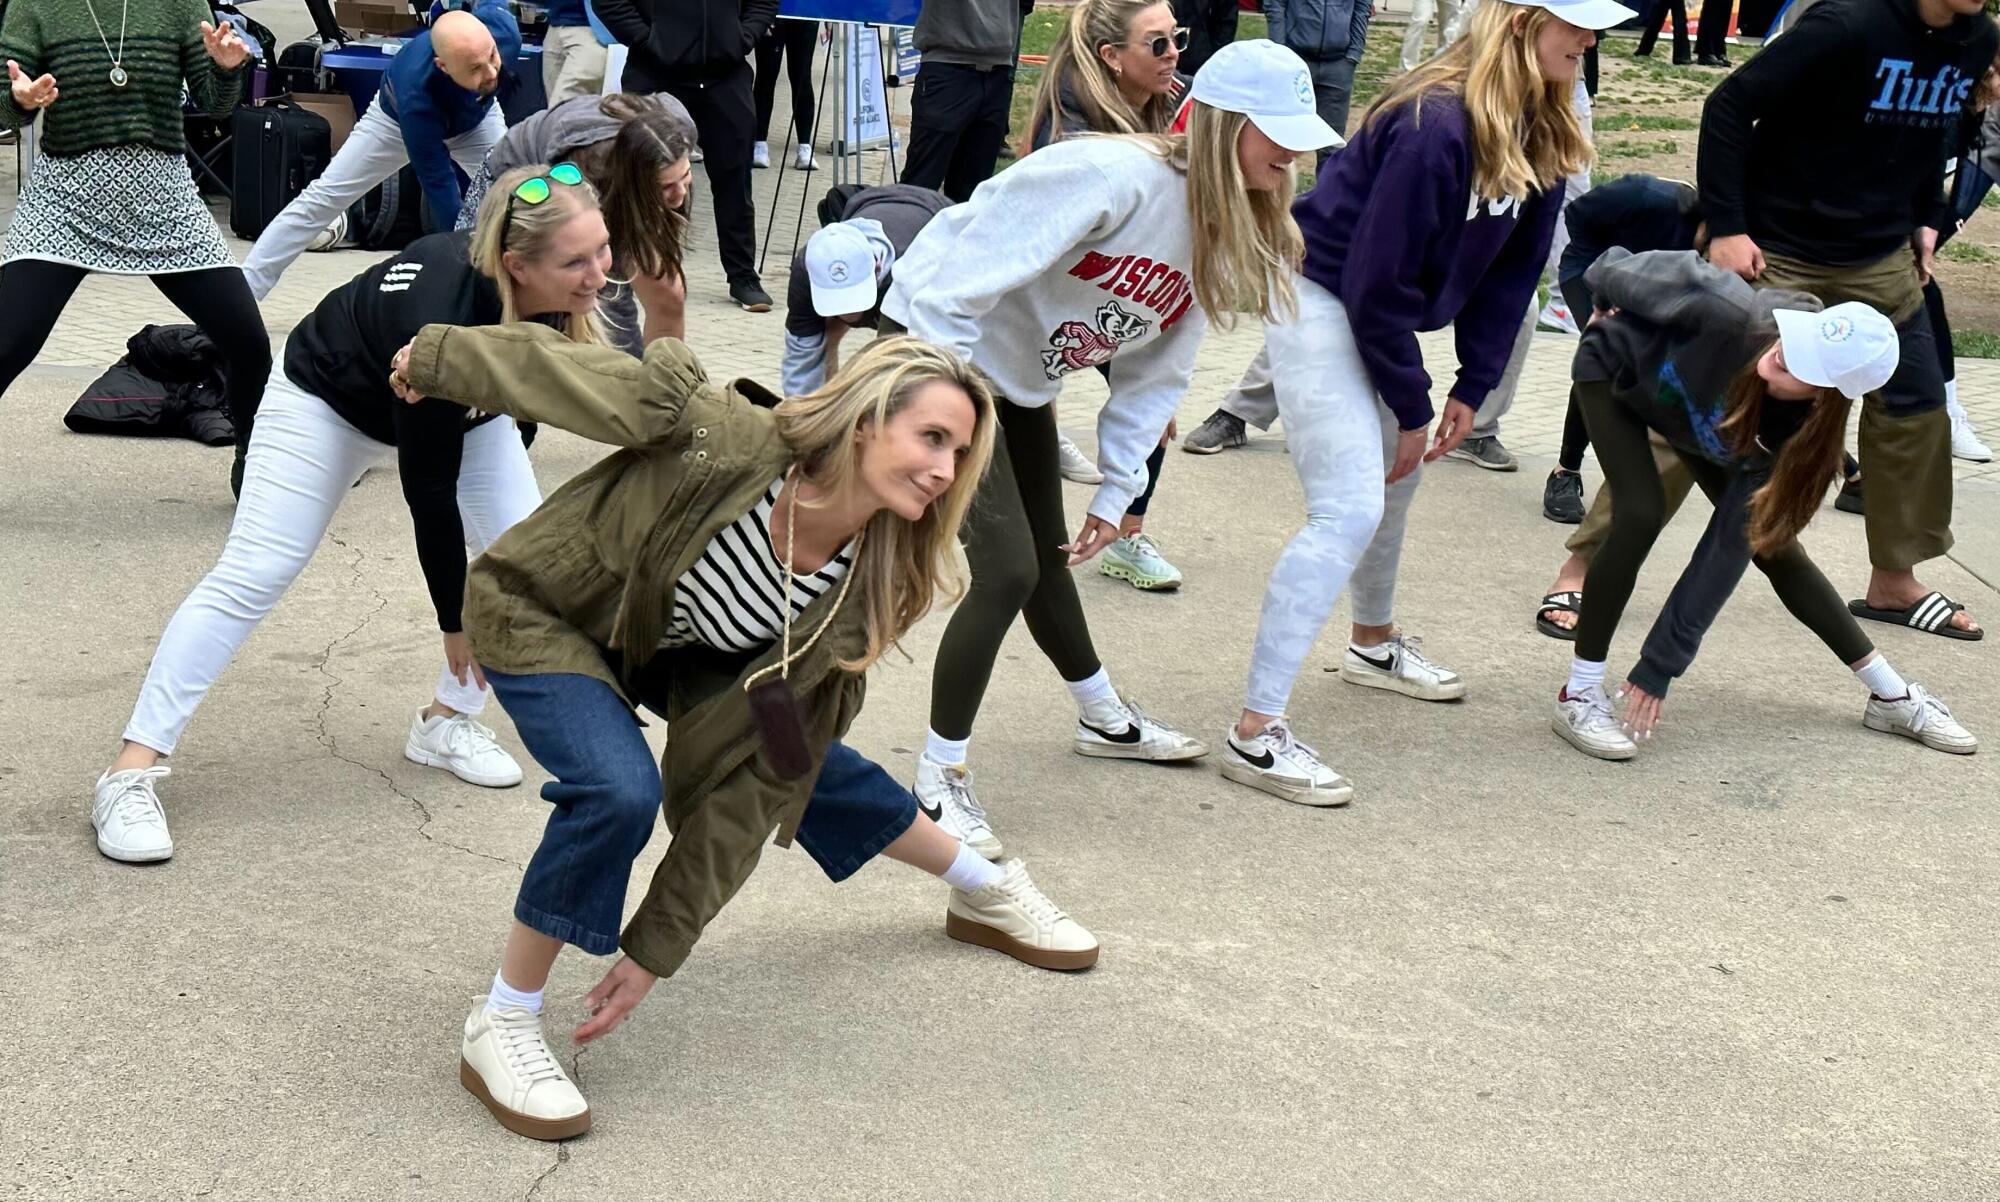 Jennifer Siebel Newsom exercising on concrete with a crowd